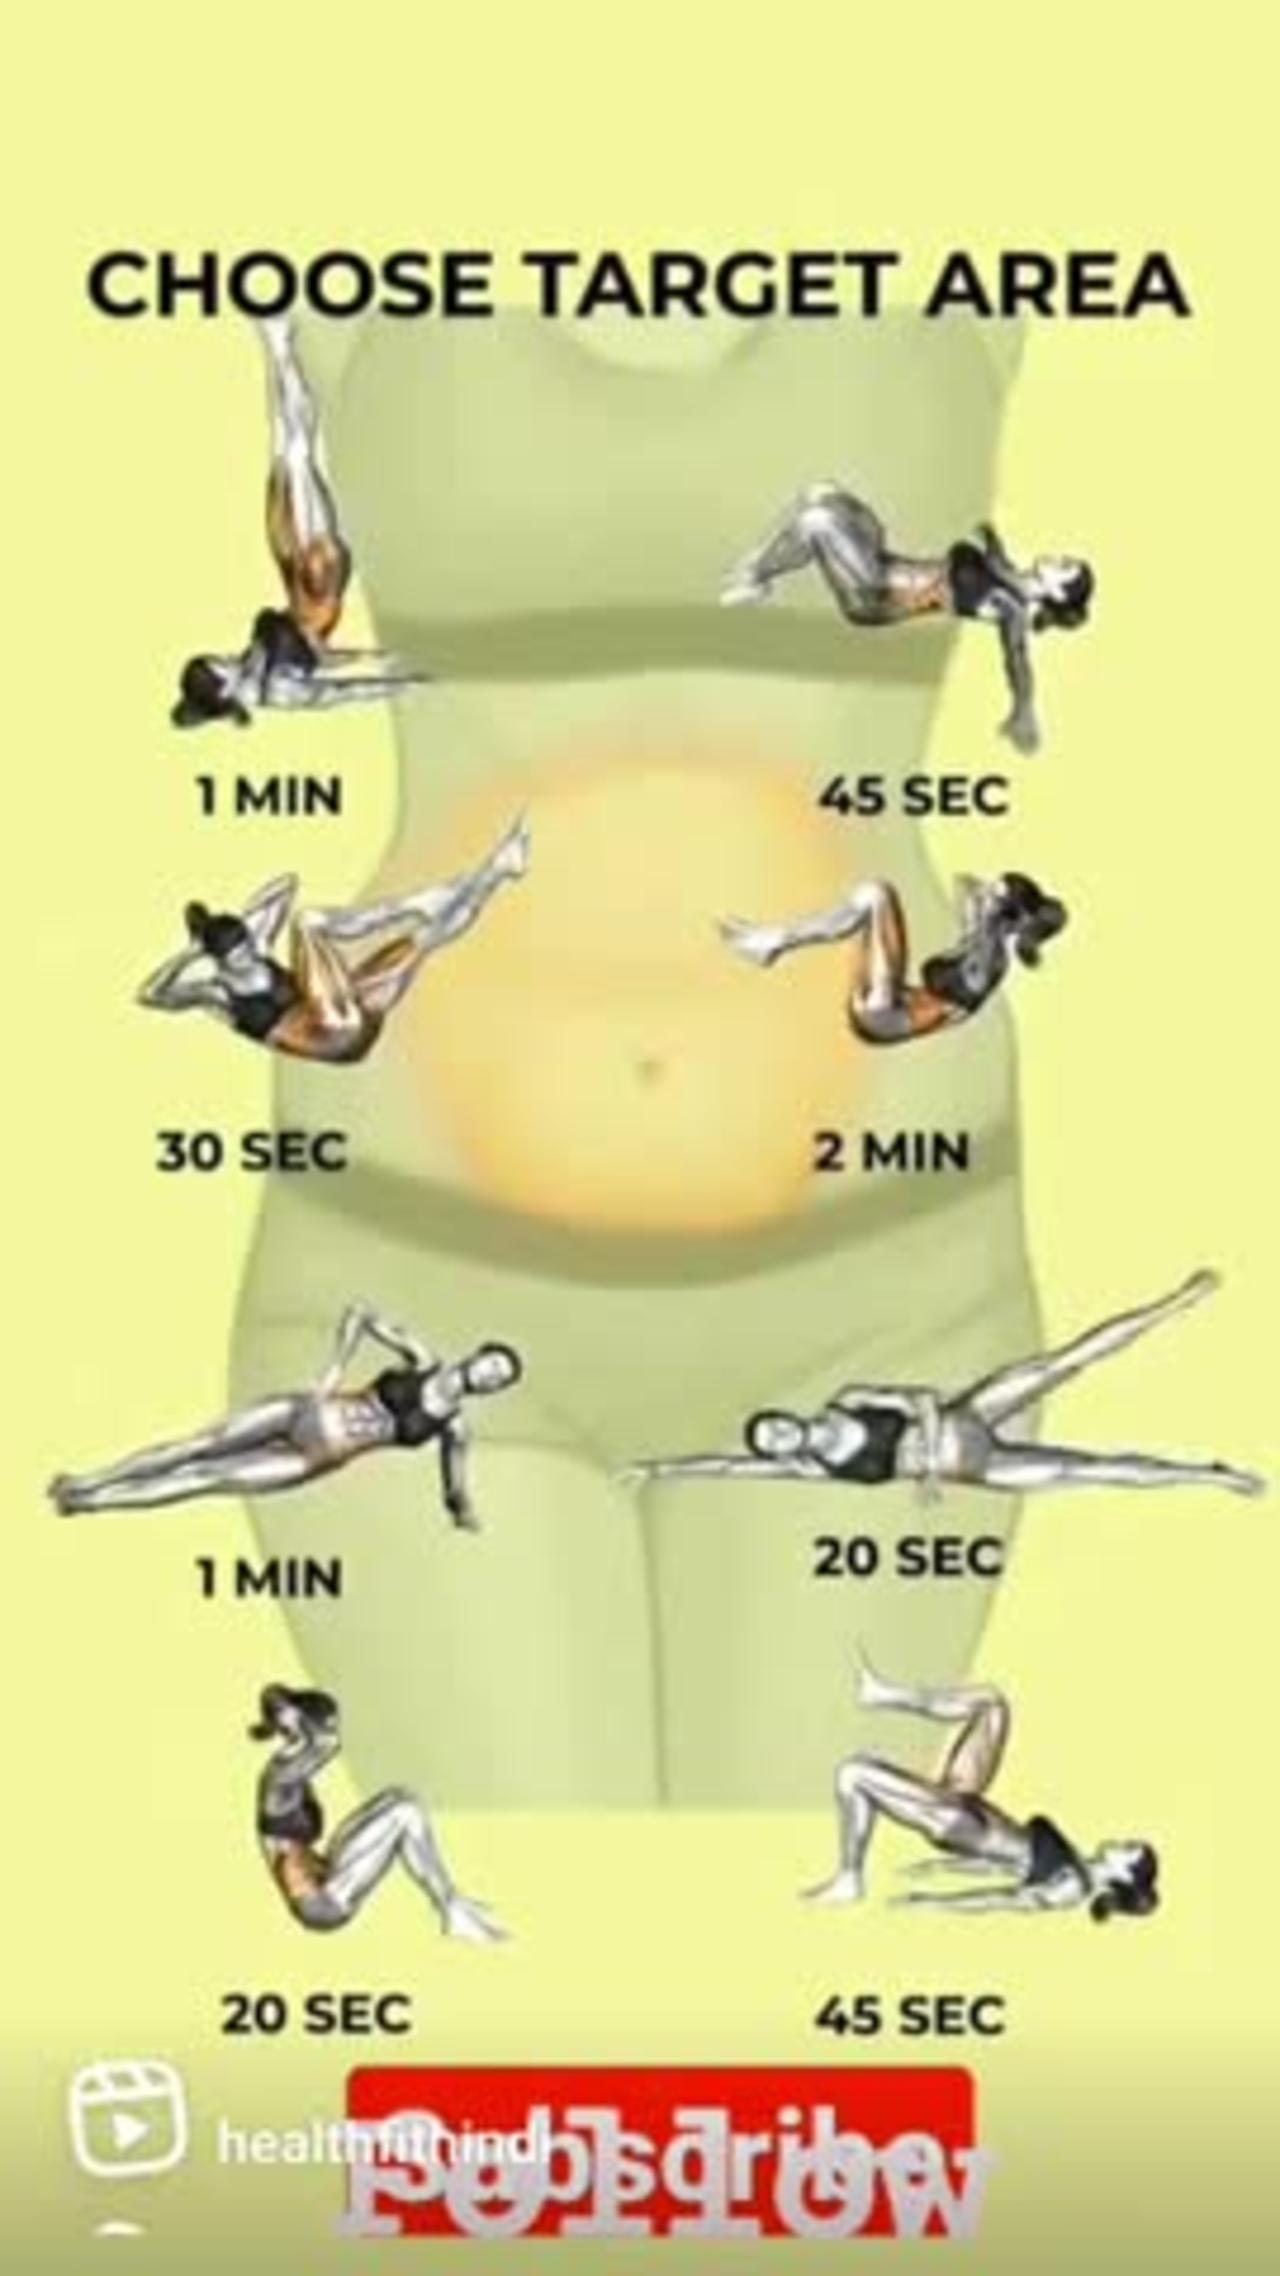 Weight lose workout exercises and waight lose product in discraption